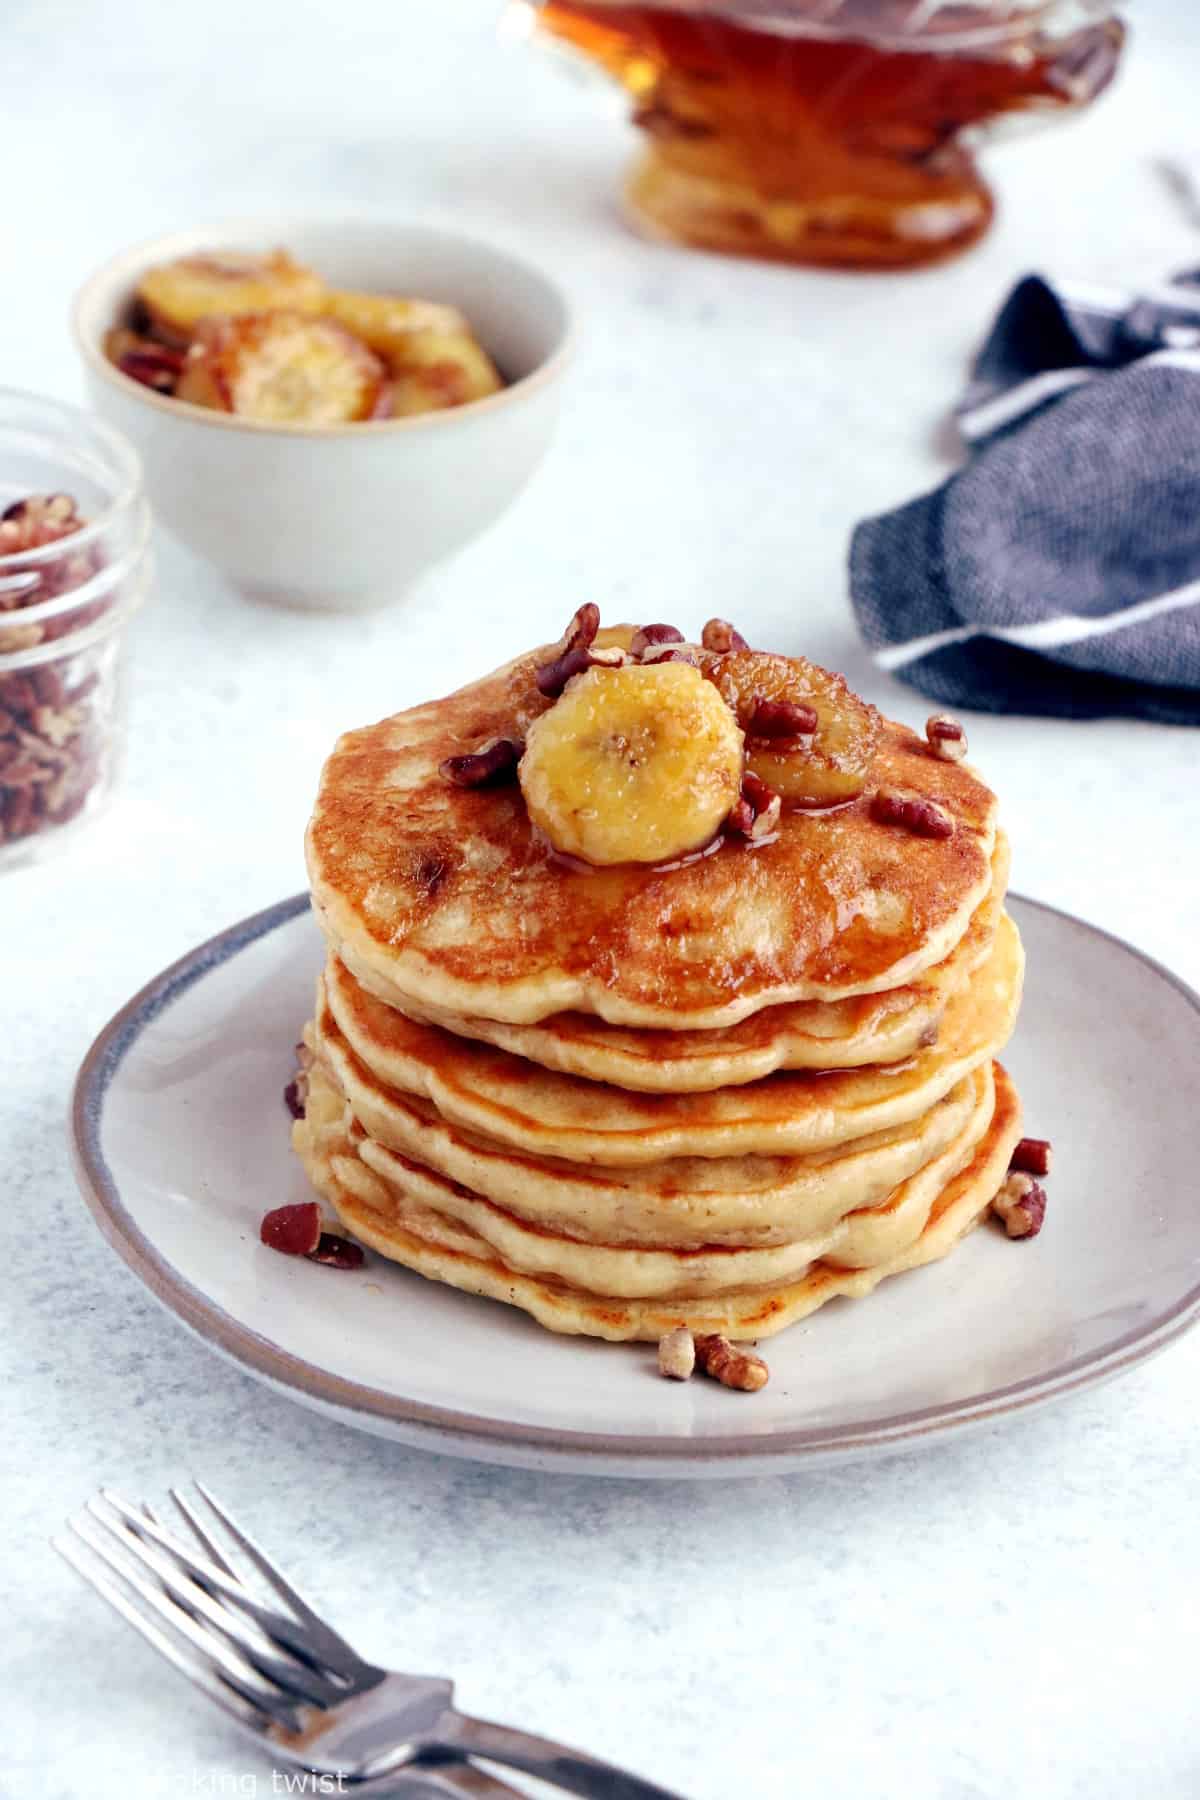 This easy fluffy banana pancake recipe yields generous, light, and airy pancakes, loaded with banana bread flavor.